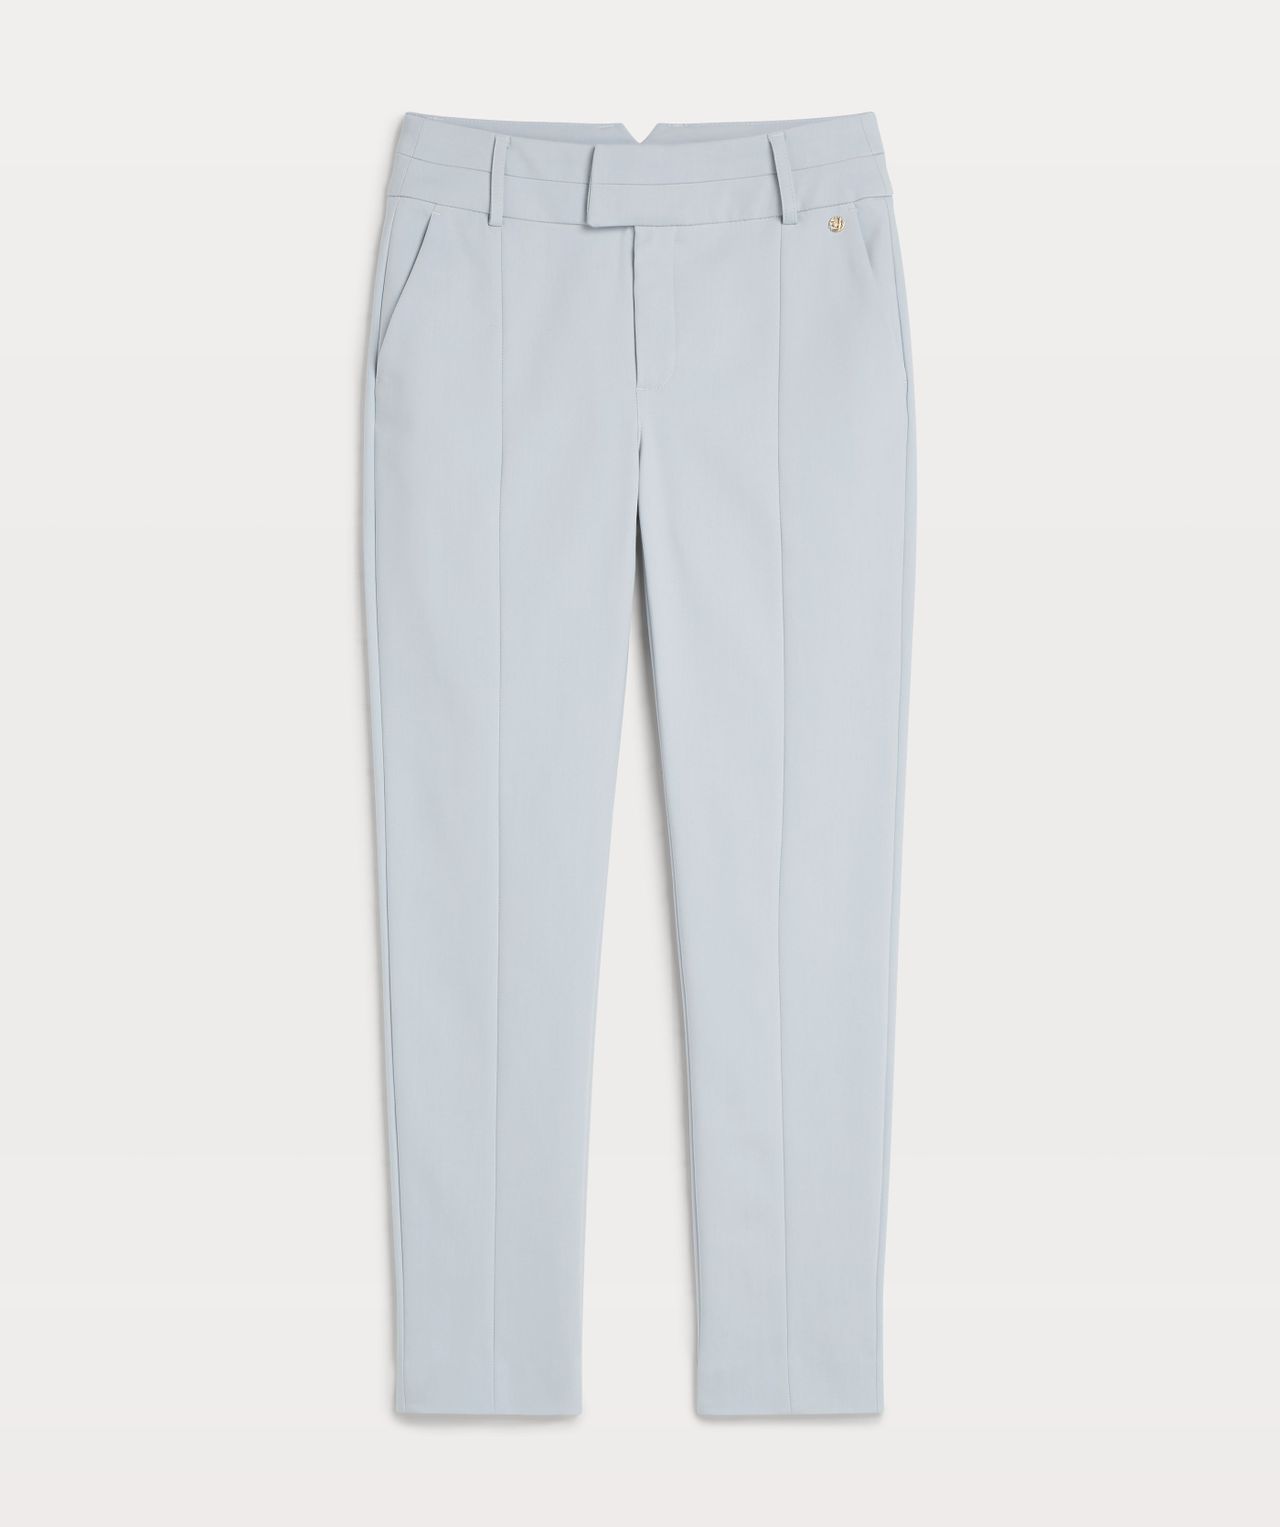 KRIS mid rise fitted trousers